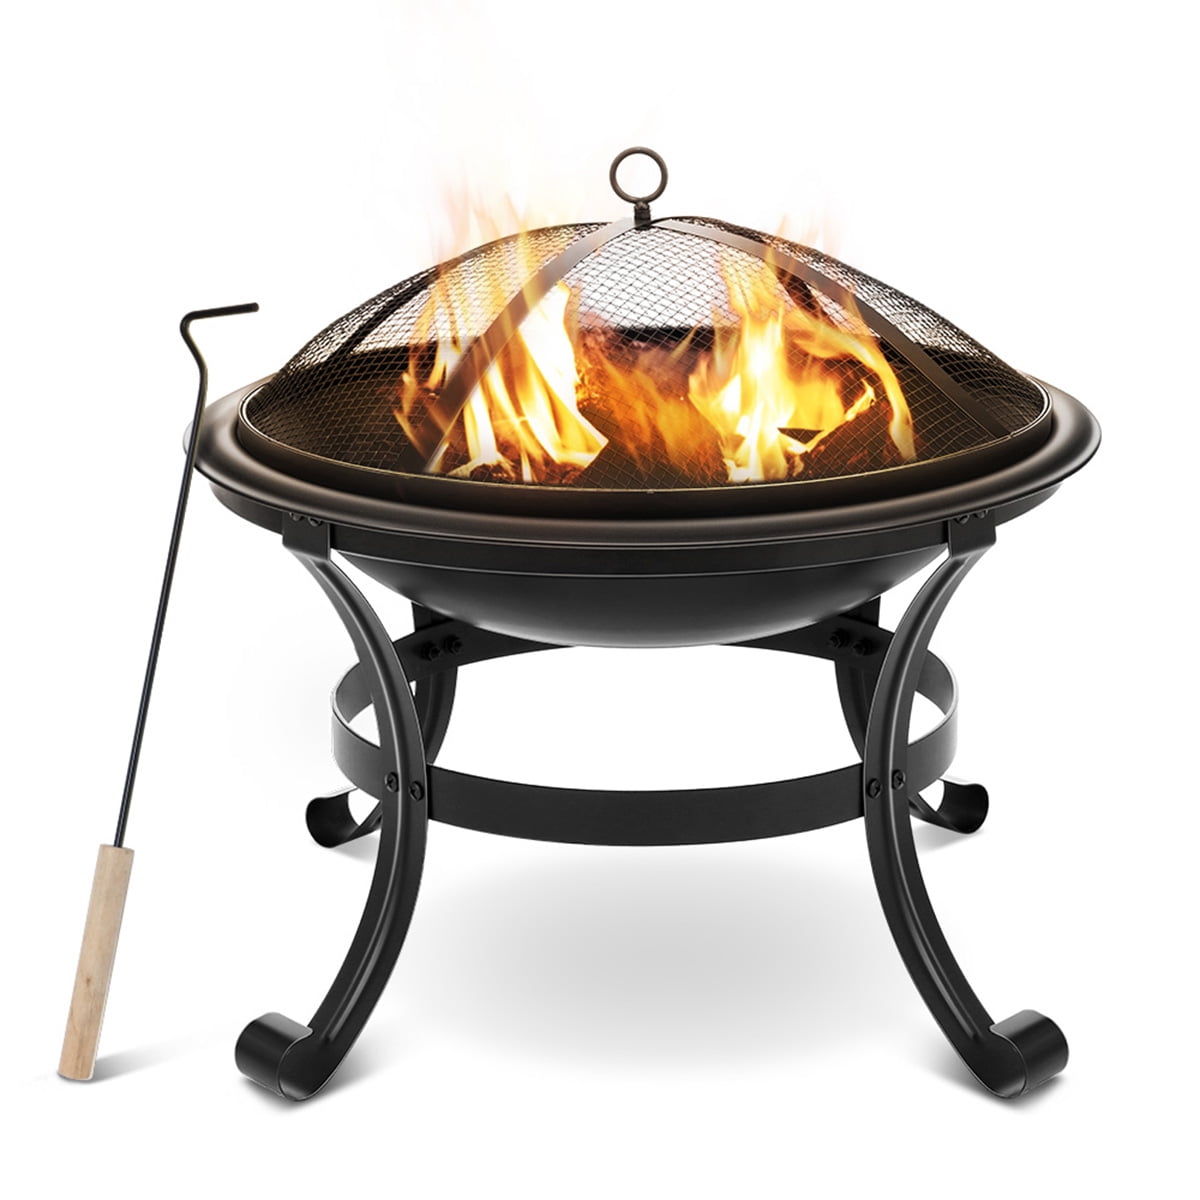 22 Fire Pits Bowl Outdoor, Fire Pit Bowl